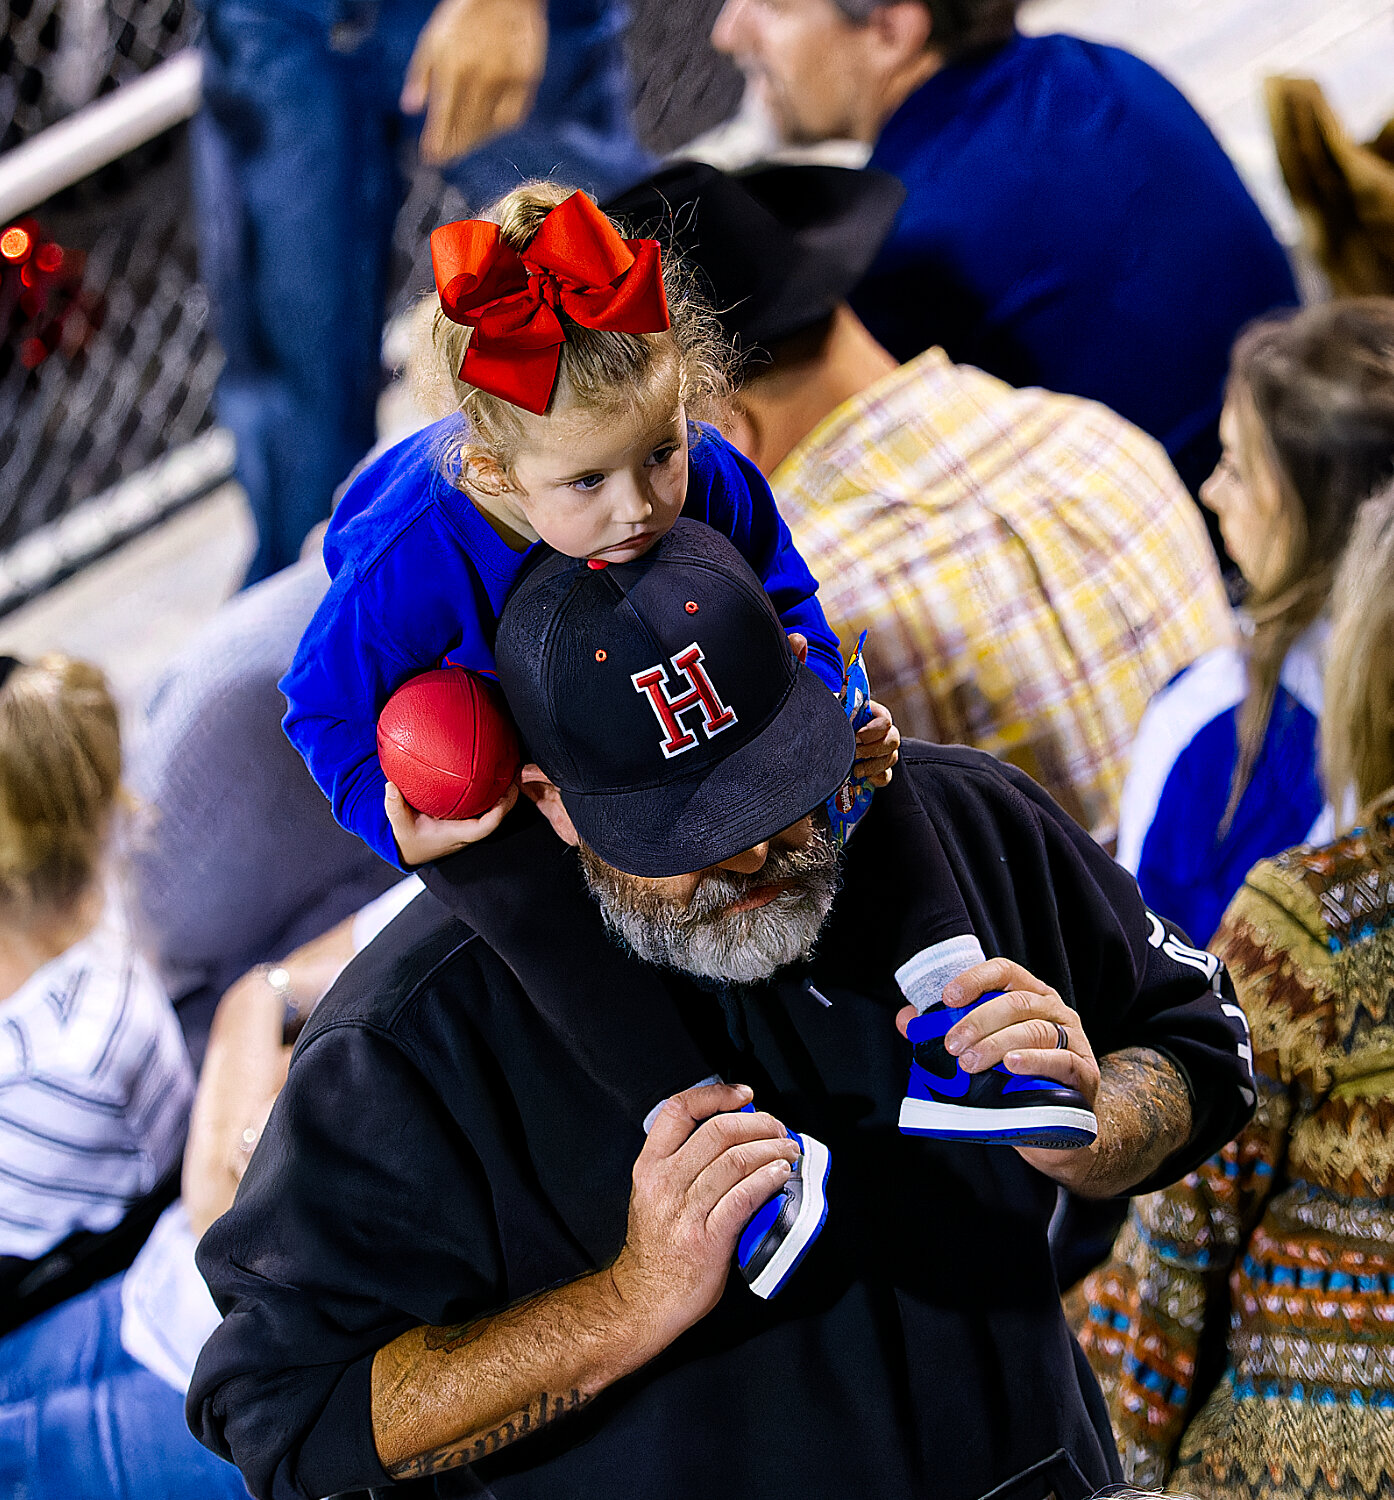 Some spectators enjoy halftime more than others. [find further football photos]